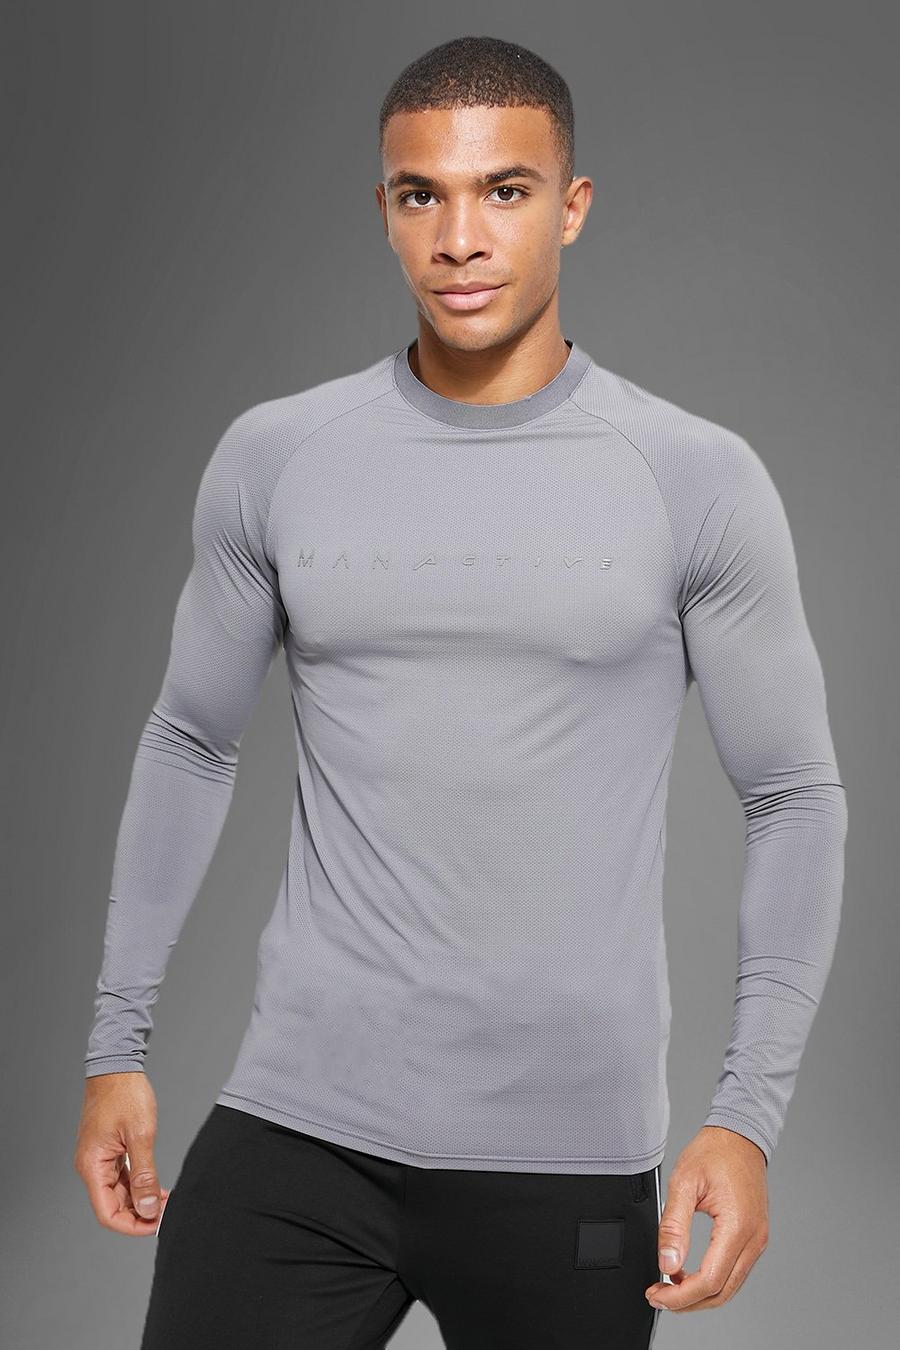 Charcoal gris Active Gym Performance Tech Long Sleeve Top image number 1